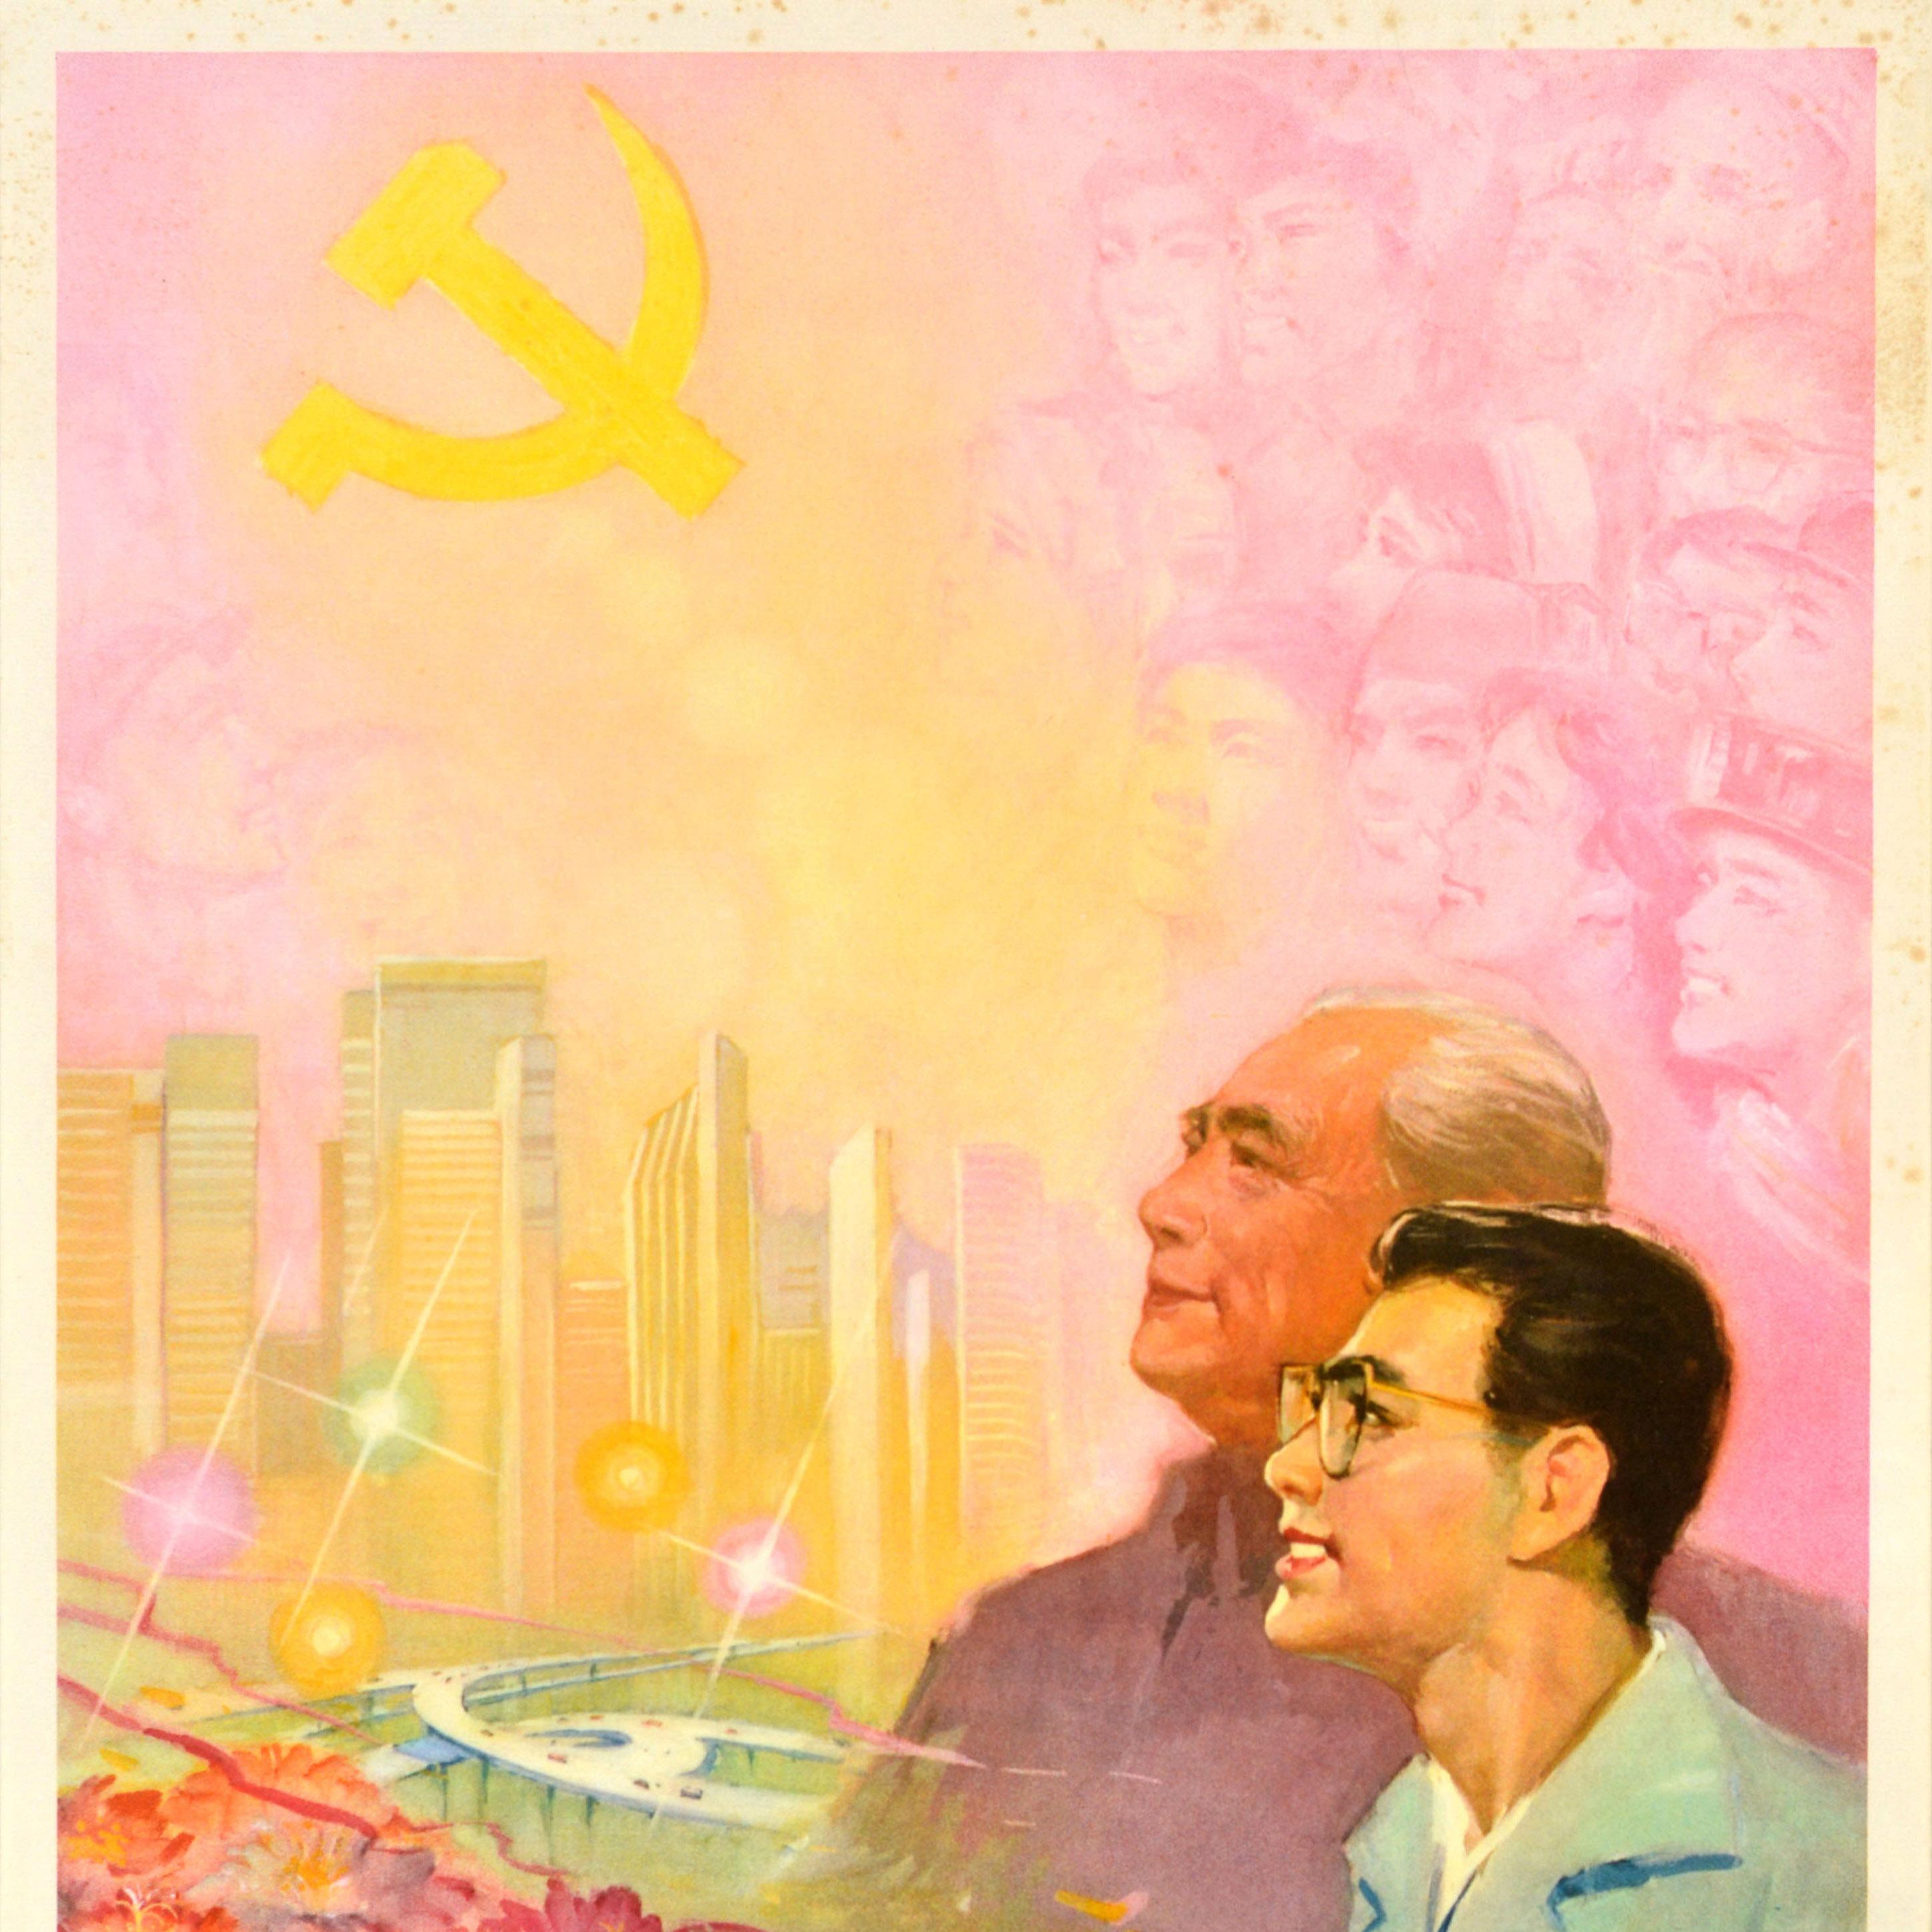 Original vintage Chinese Communist Party propaganda poster - Follow the Communist Party and Revitalise China / 跟着共产党 振兴中华 - featuring an illustration of a smiling elderly gentlemen and young man looking up towards a bright future represented by a